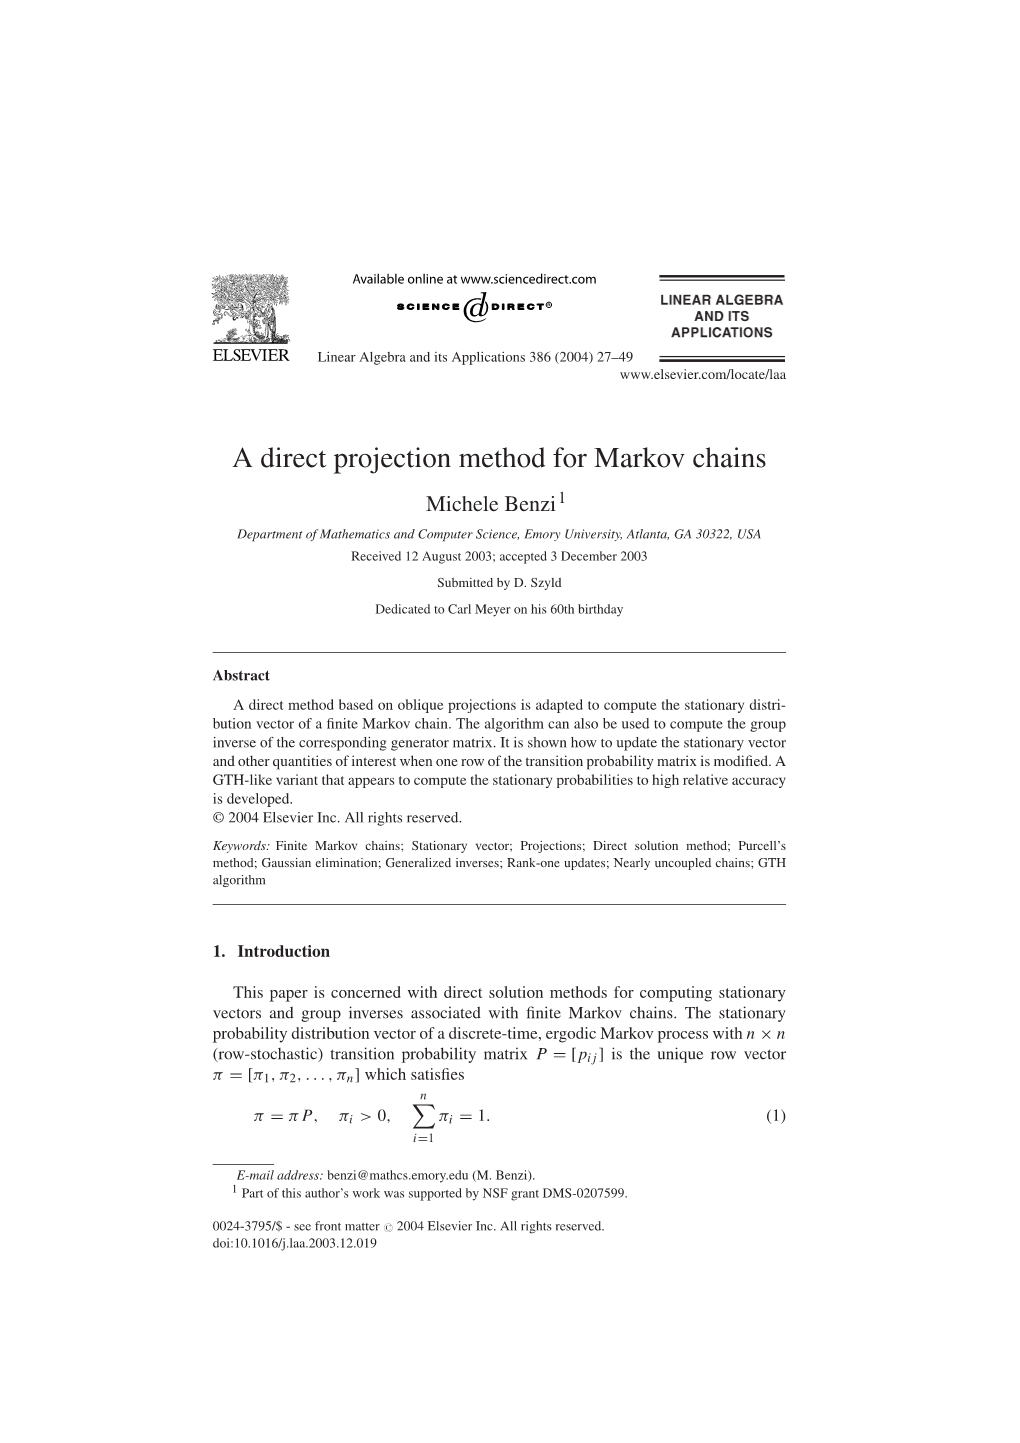 A Direct Projection Method for Markov Chains